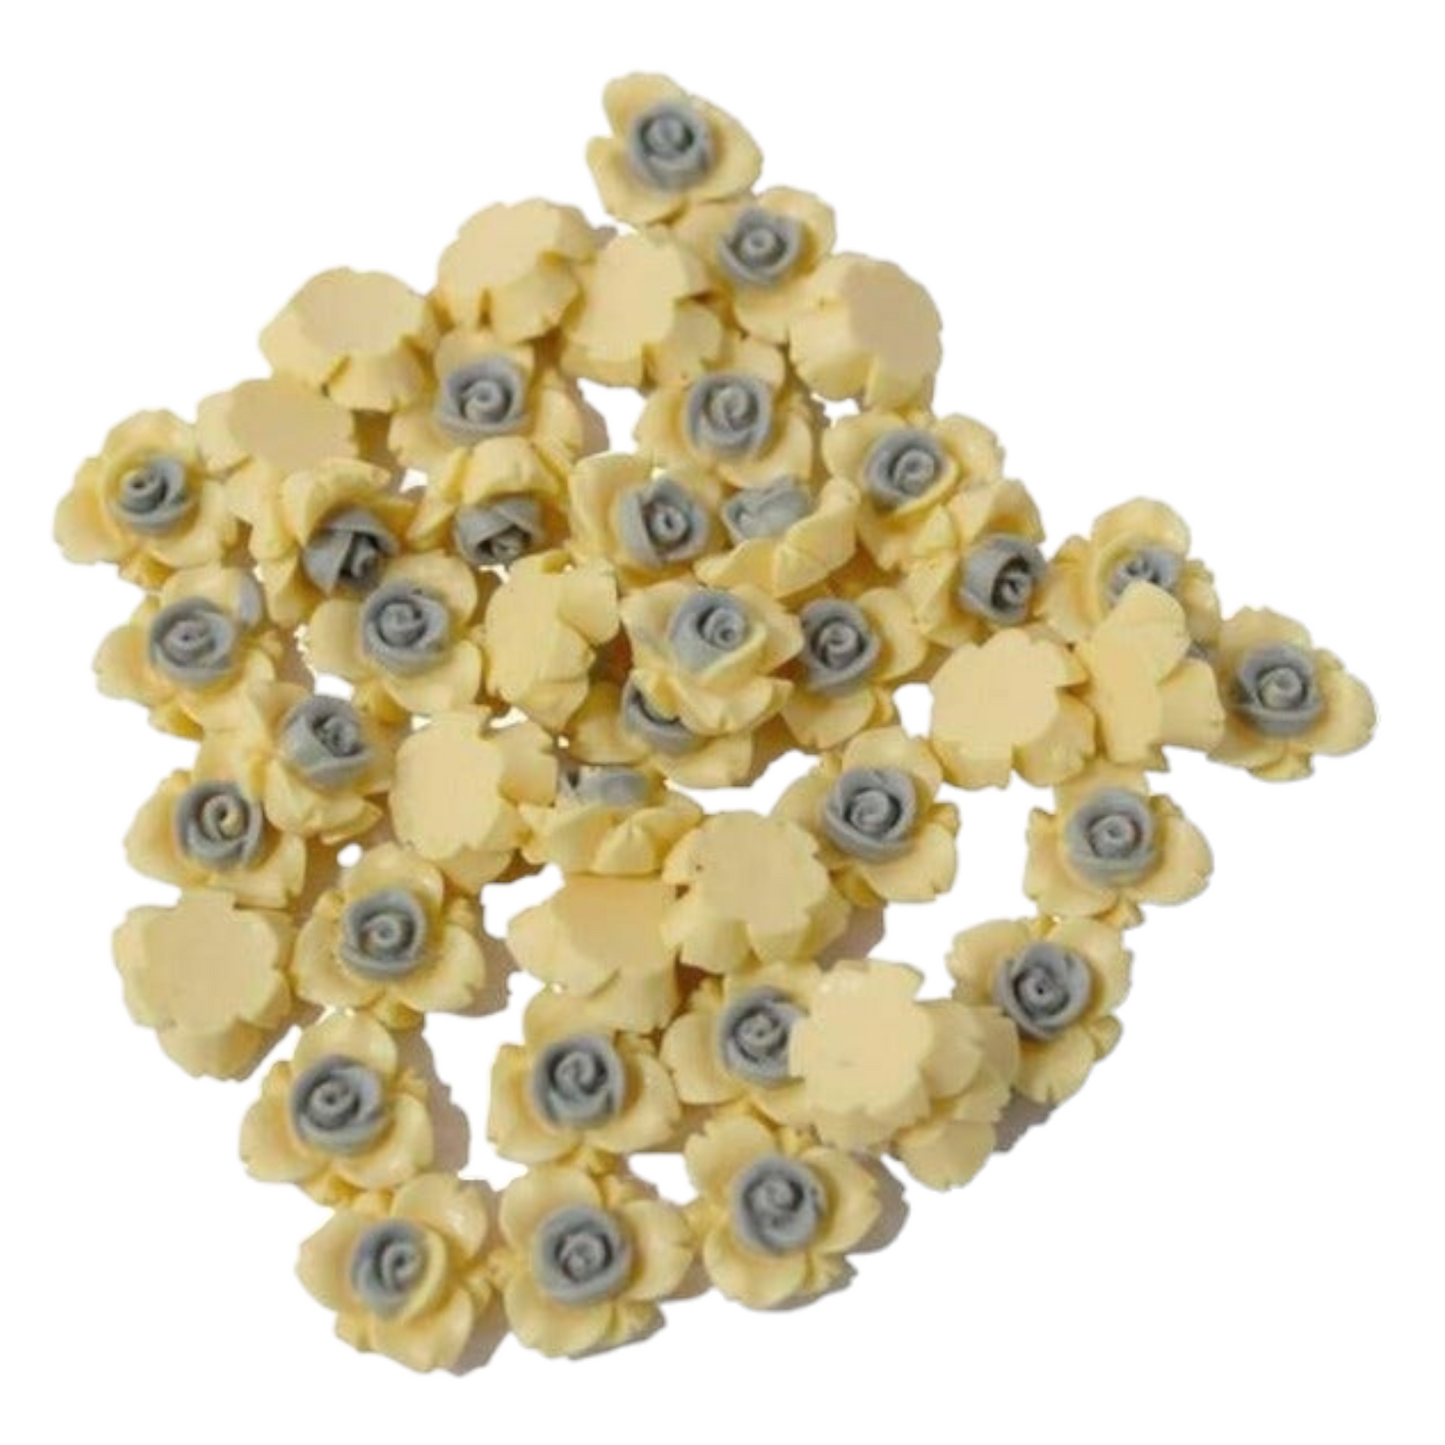 Light-weight Resin Ceramic Paan Flower Motif for Craft Trousseau Packing Decoration - 11588